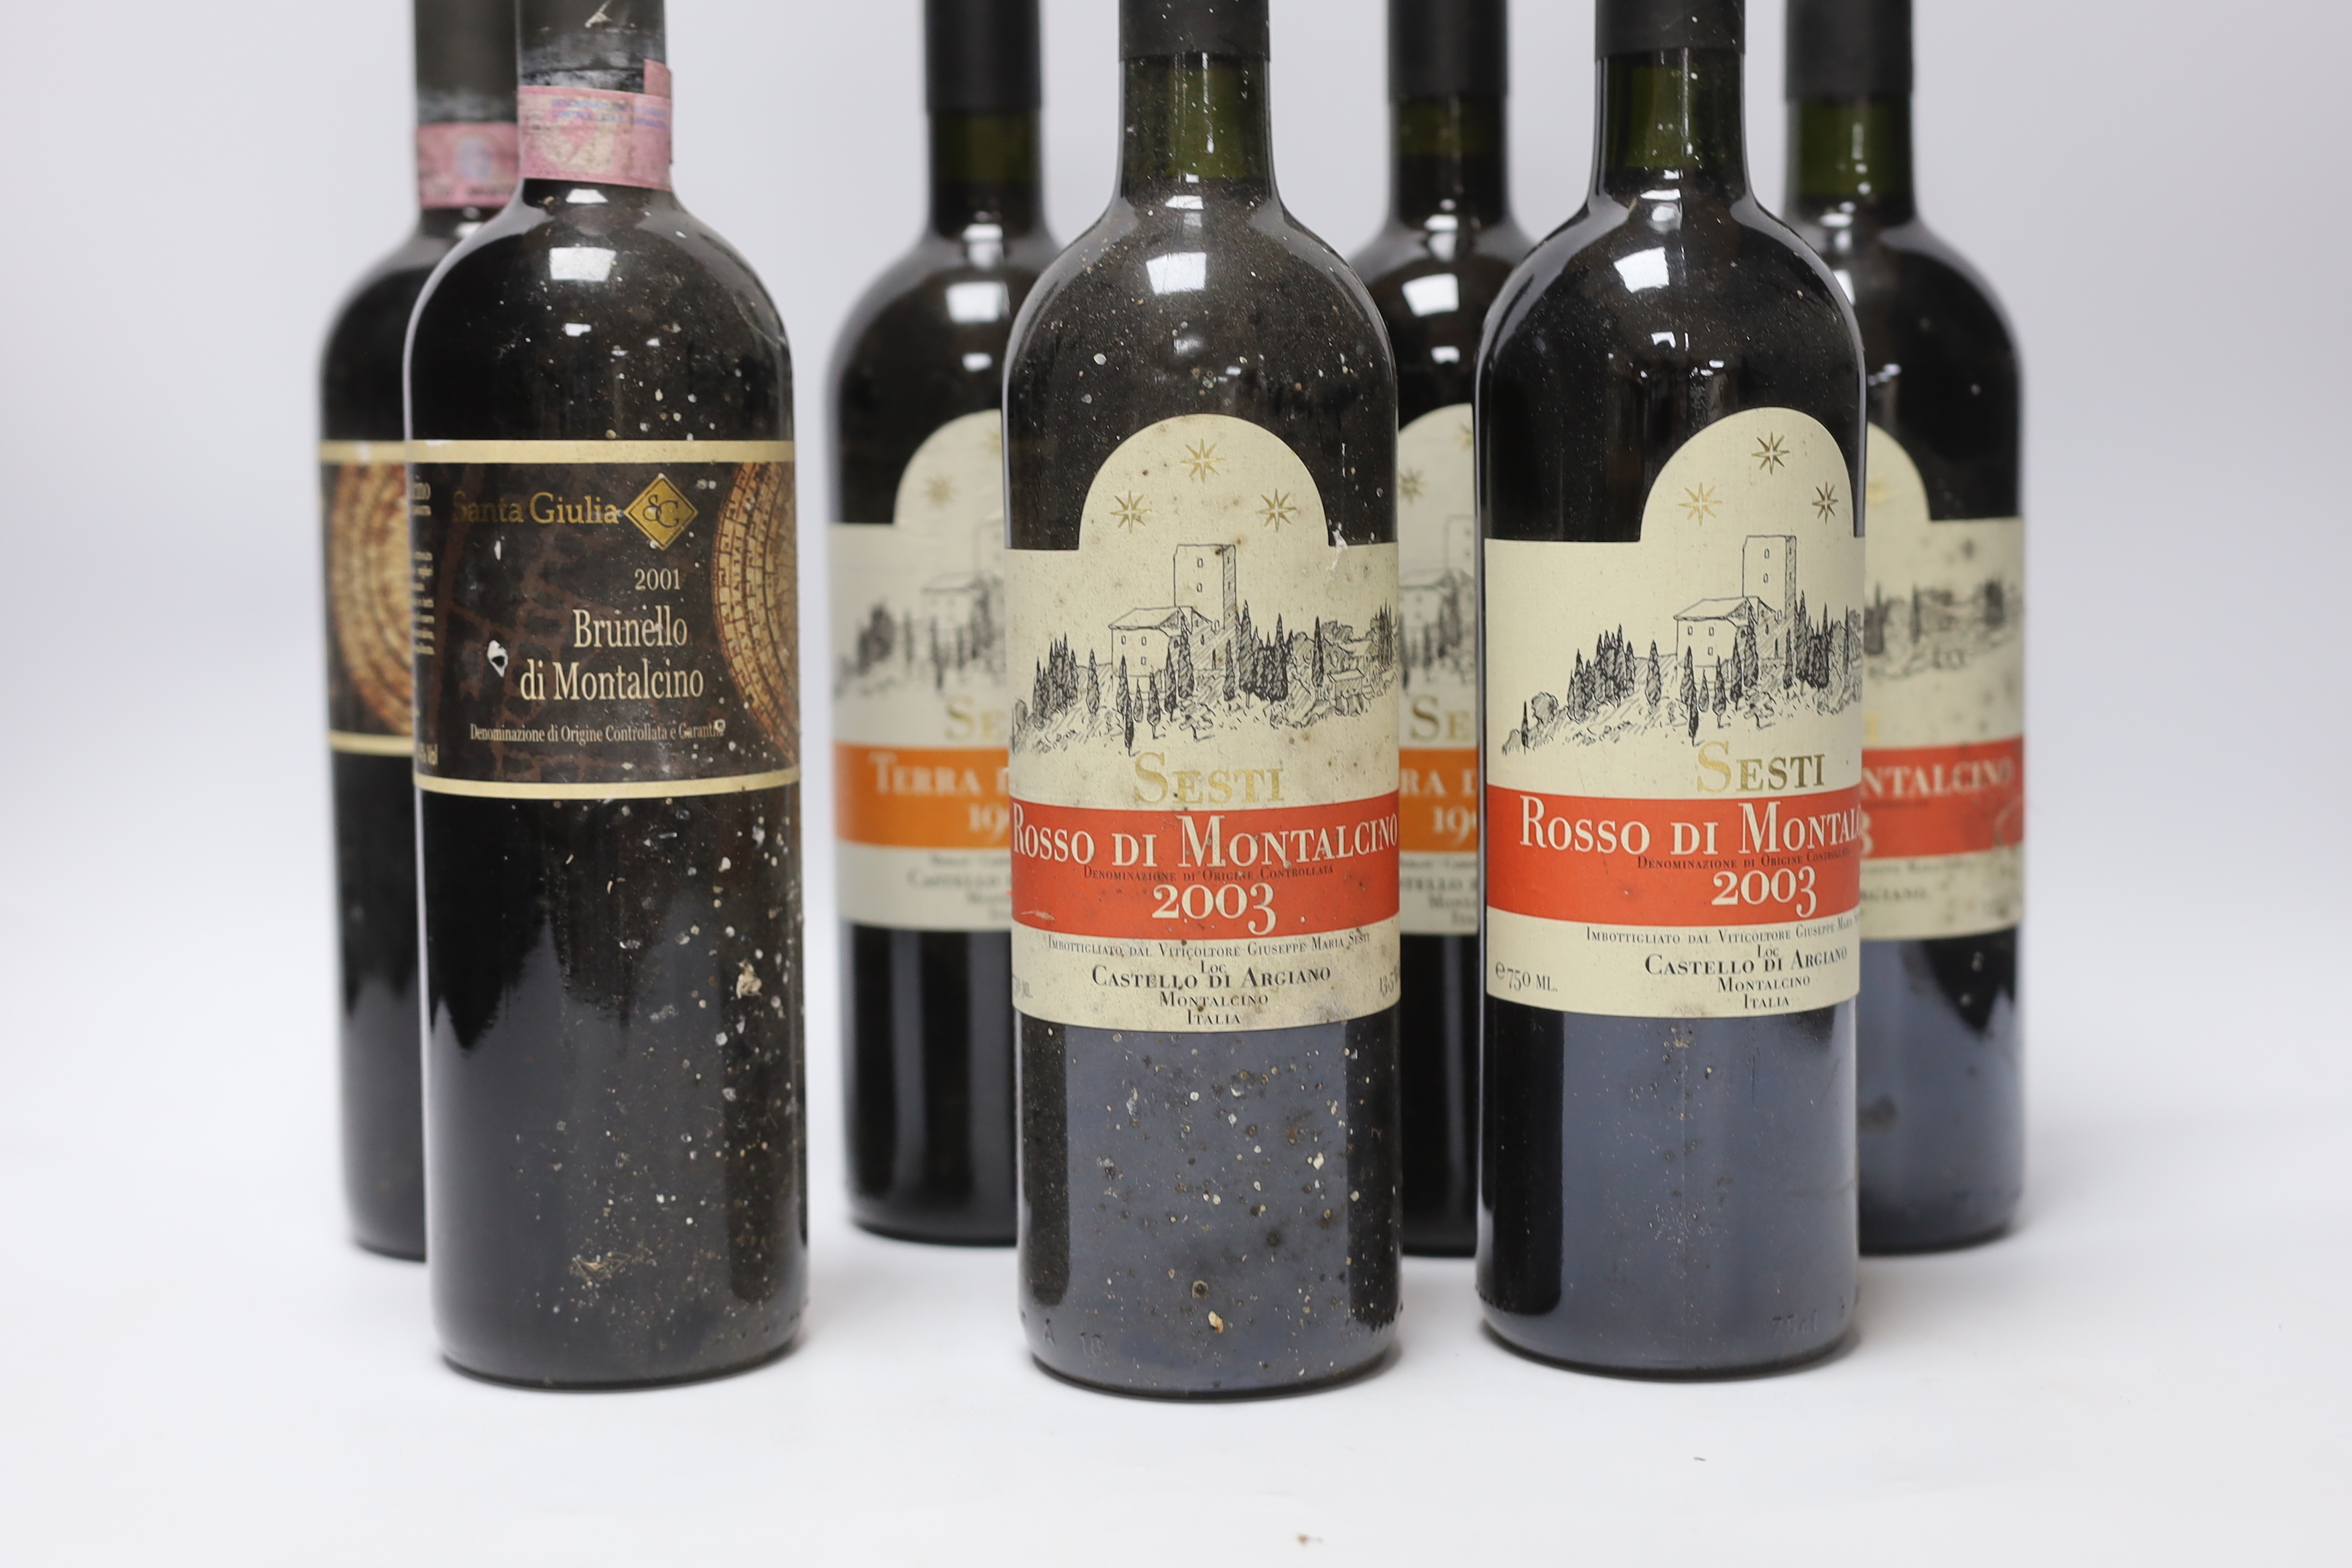 Ten bottles of red wine including three Rossi Di Montalcino 2003, four bottles of Terra Di Siena 1999 and three bottles of Brunello di Montalcino